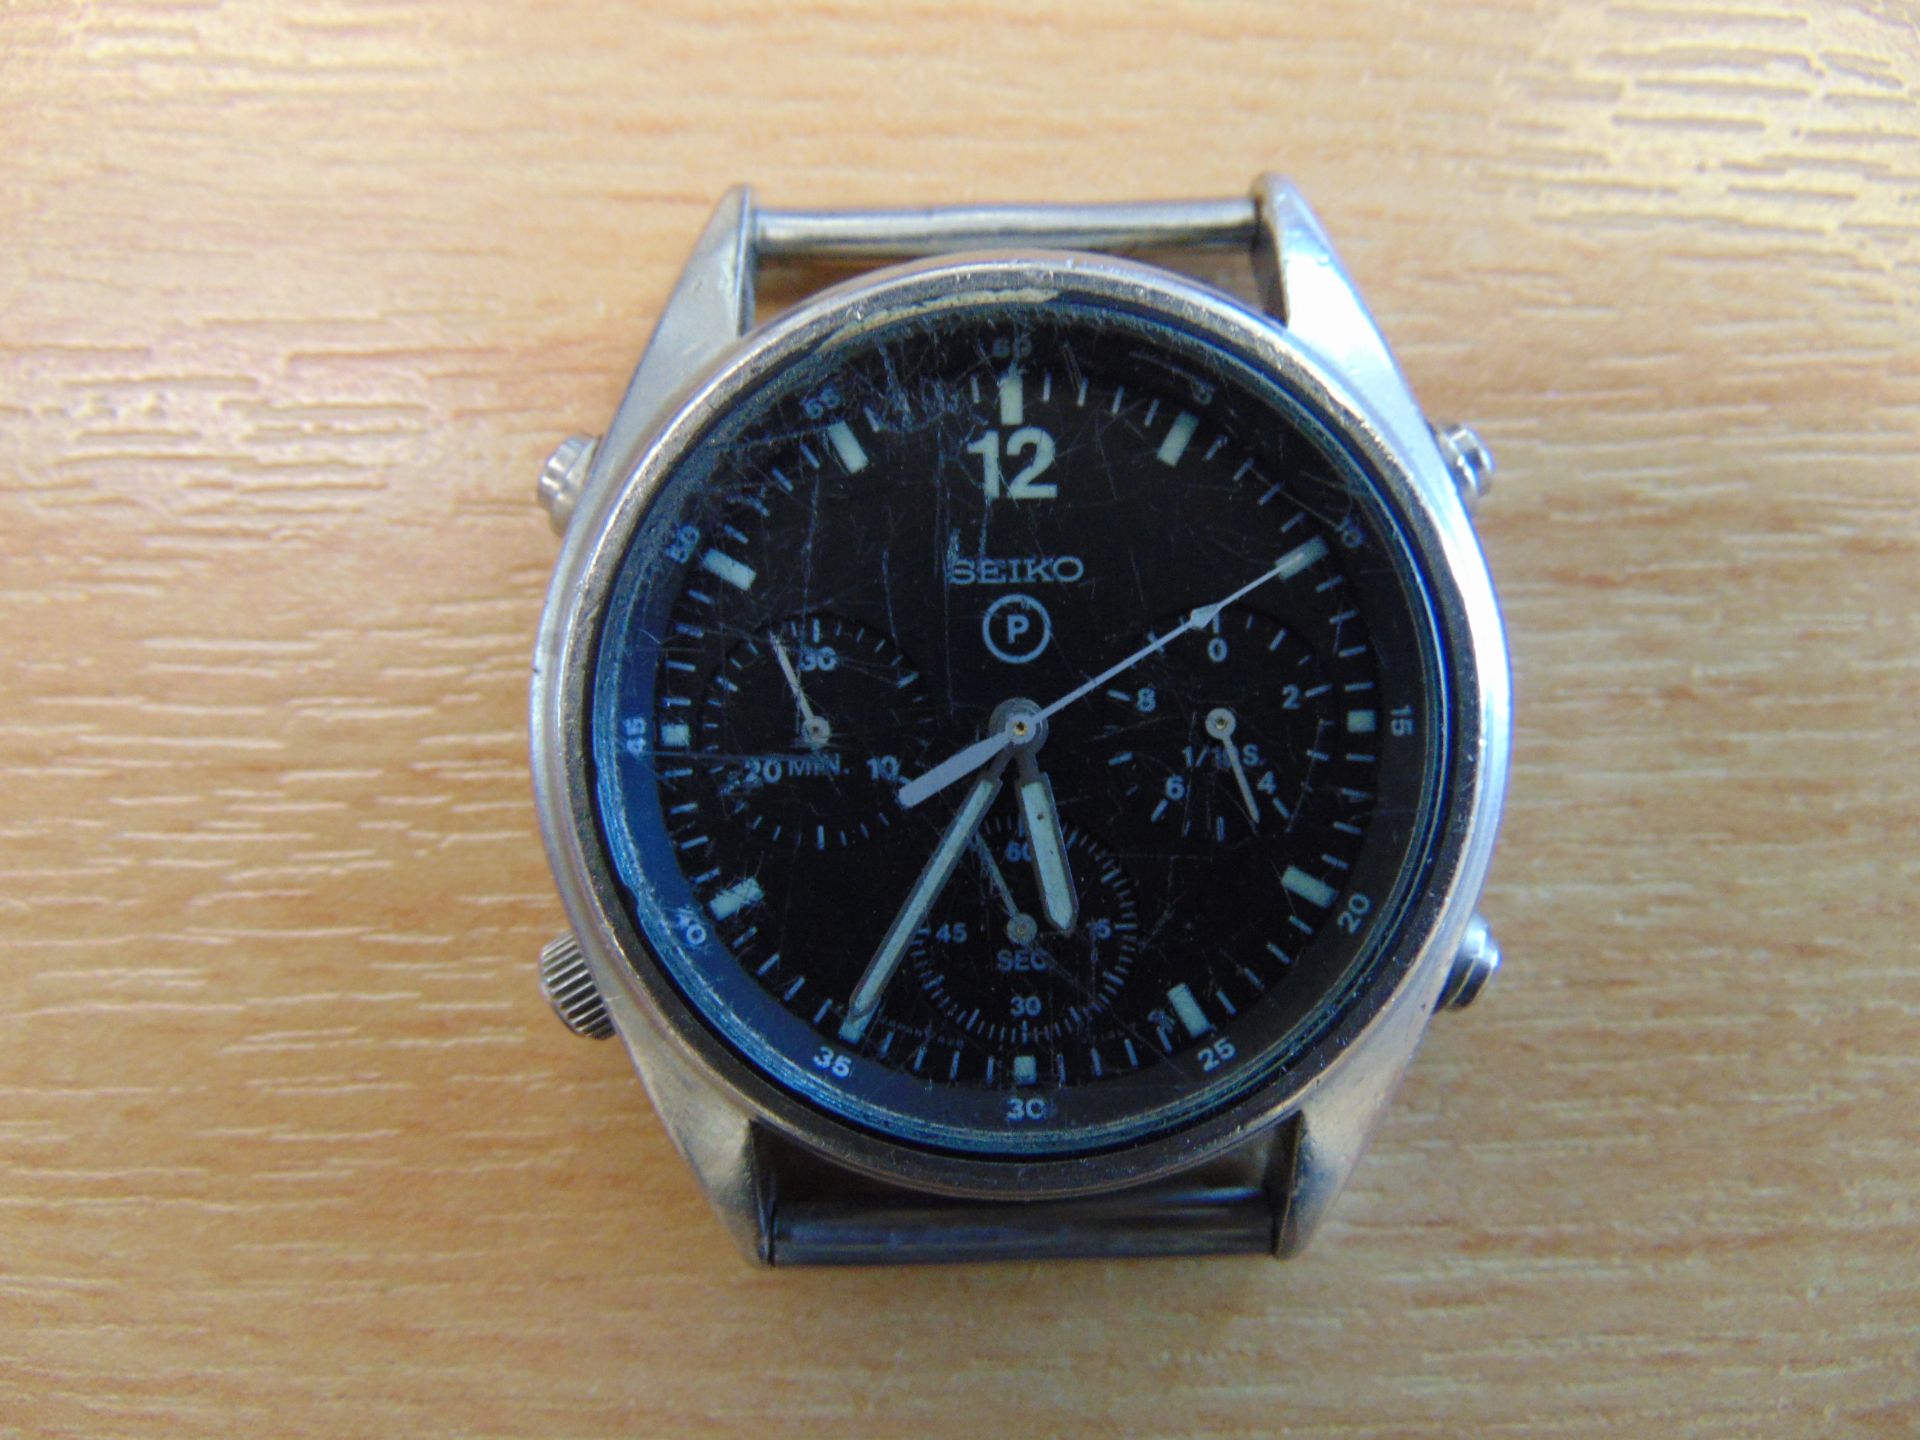 SEIKO Gen 1 Pilots Chrono RAF Harrier Force Issue Nato Marks, Date 1984 - Image 4 of 6